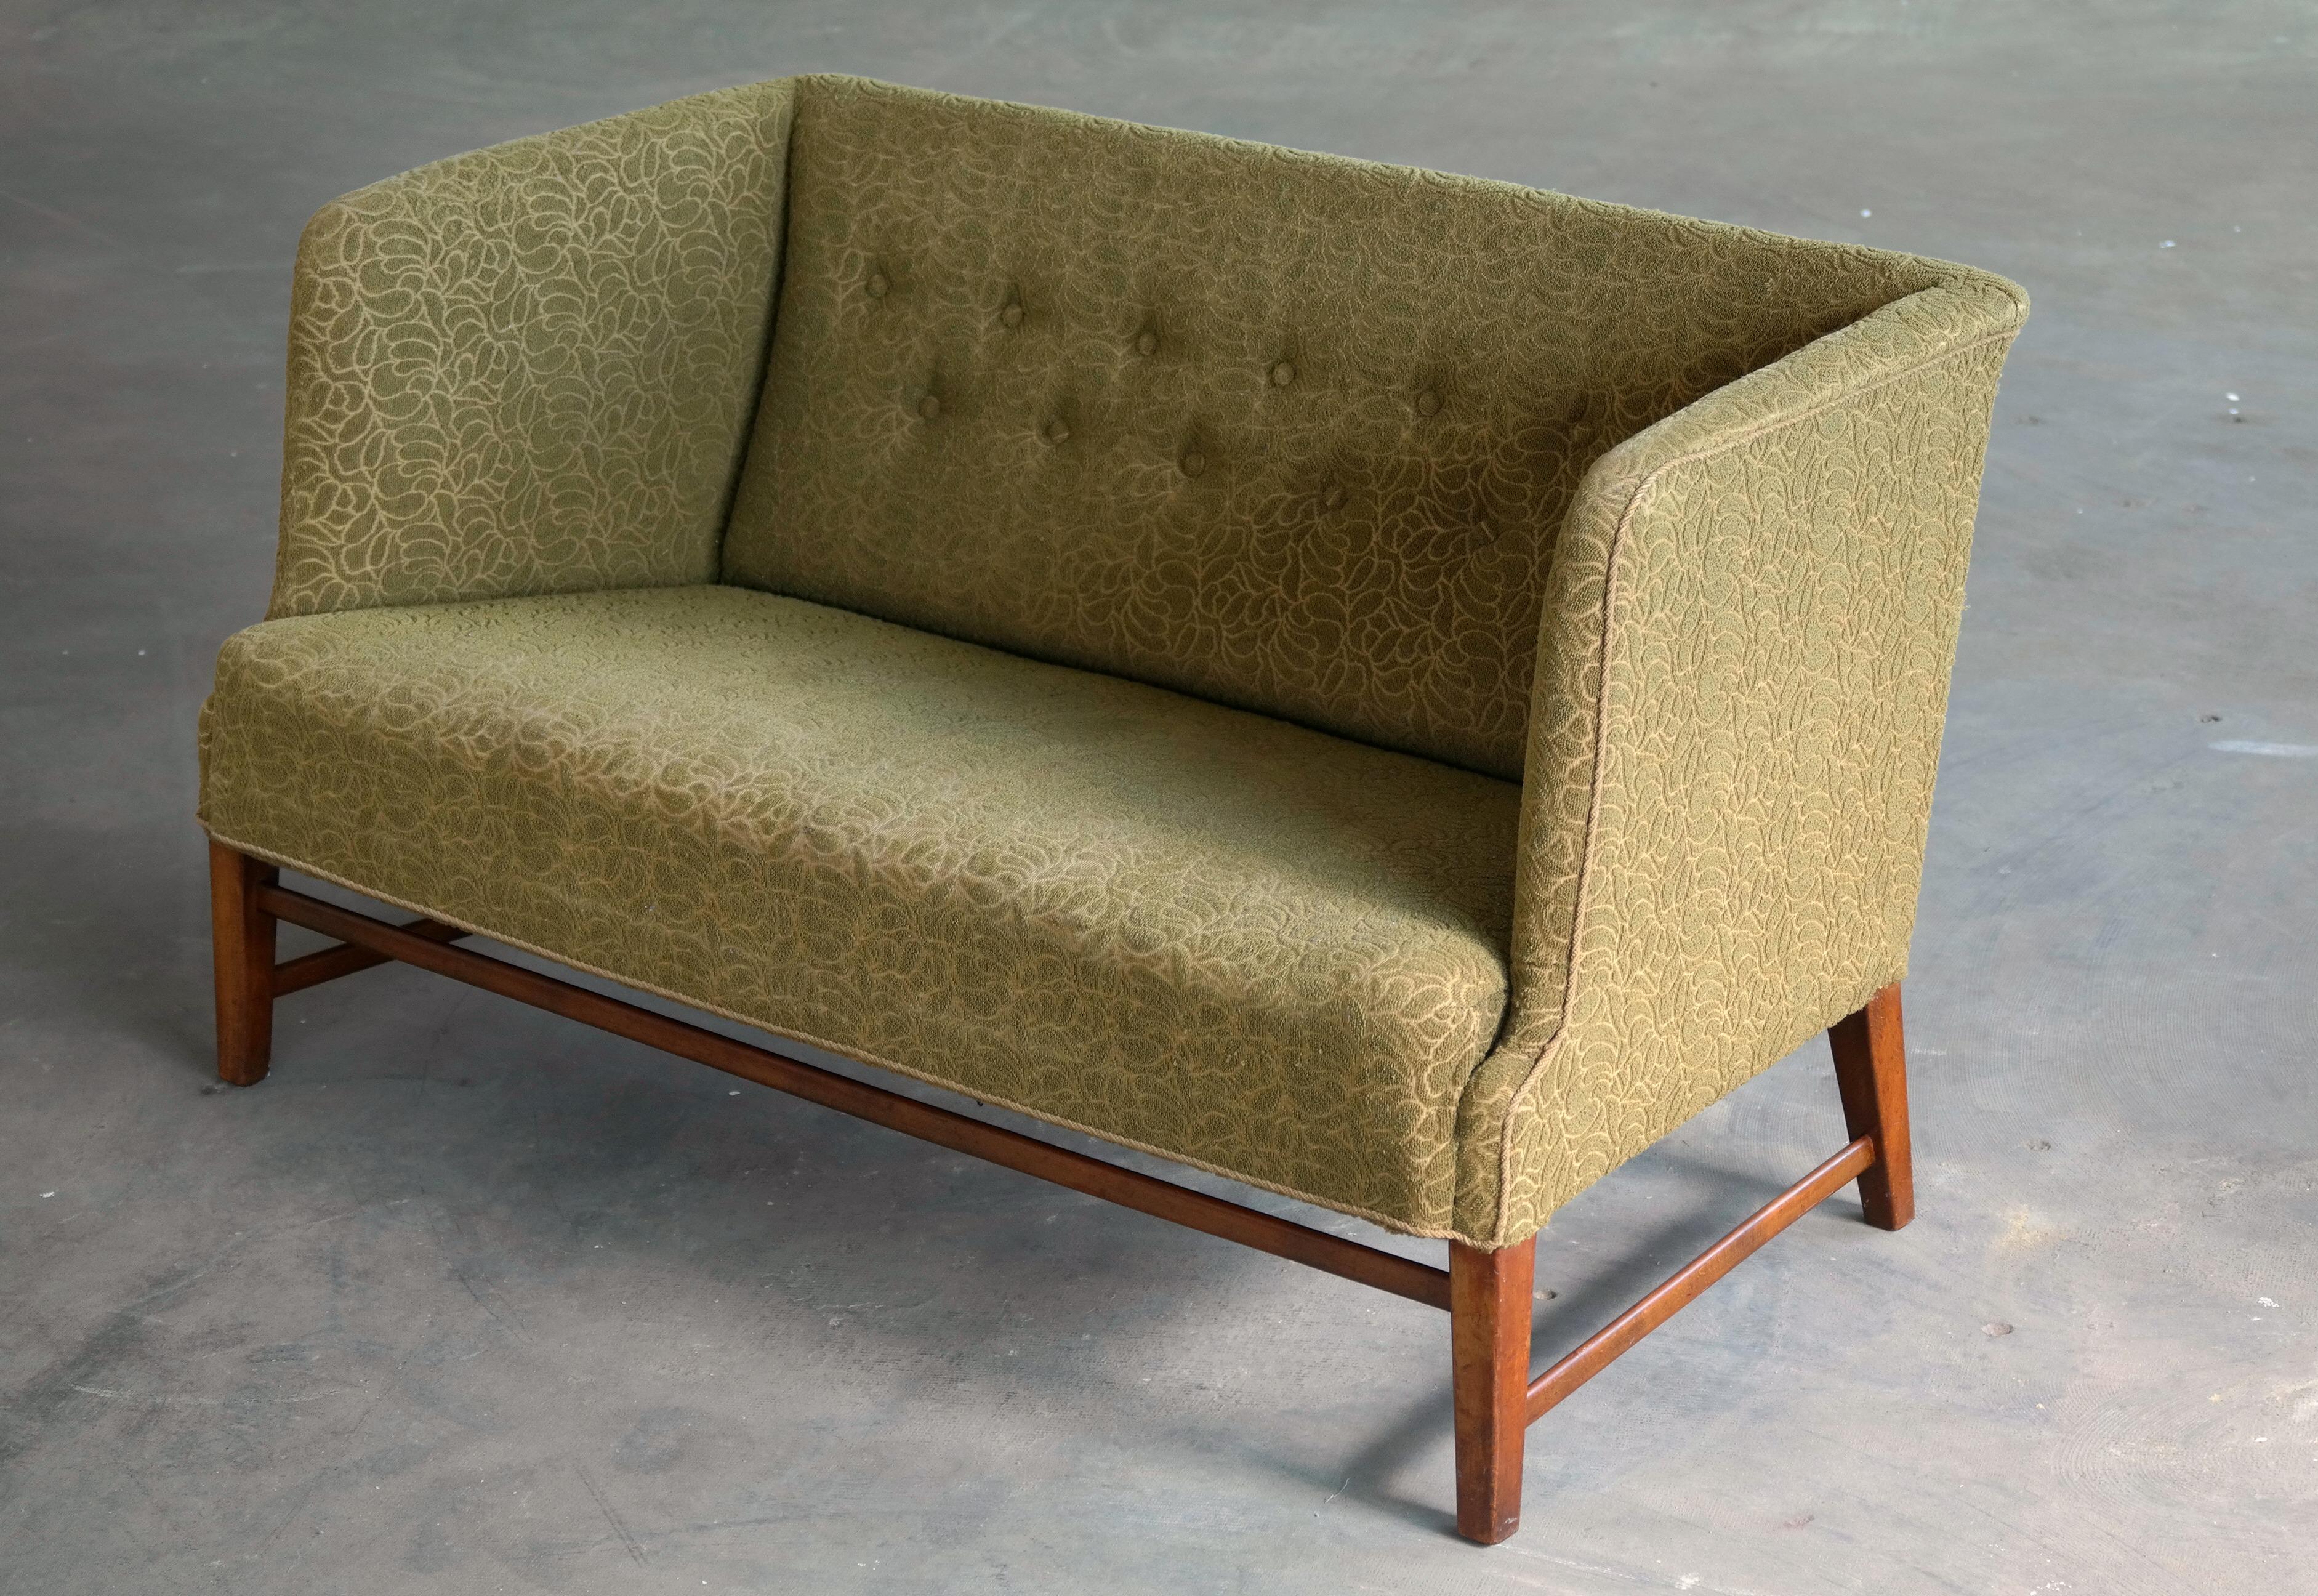 Great and rare Danish Settee from, circa 1938 attributed to Master Carpenter, Georg Kofoed of Copenhagen and similar in style to some of Kaare Klints earlier designs with slightly high sides and legs with stretchers for support. High quality sturdy